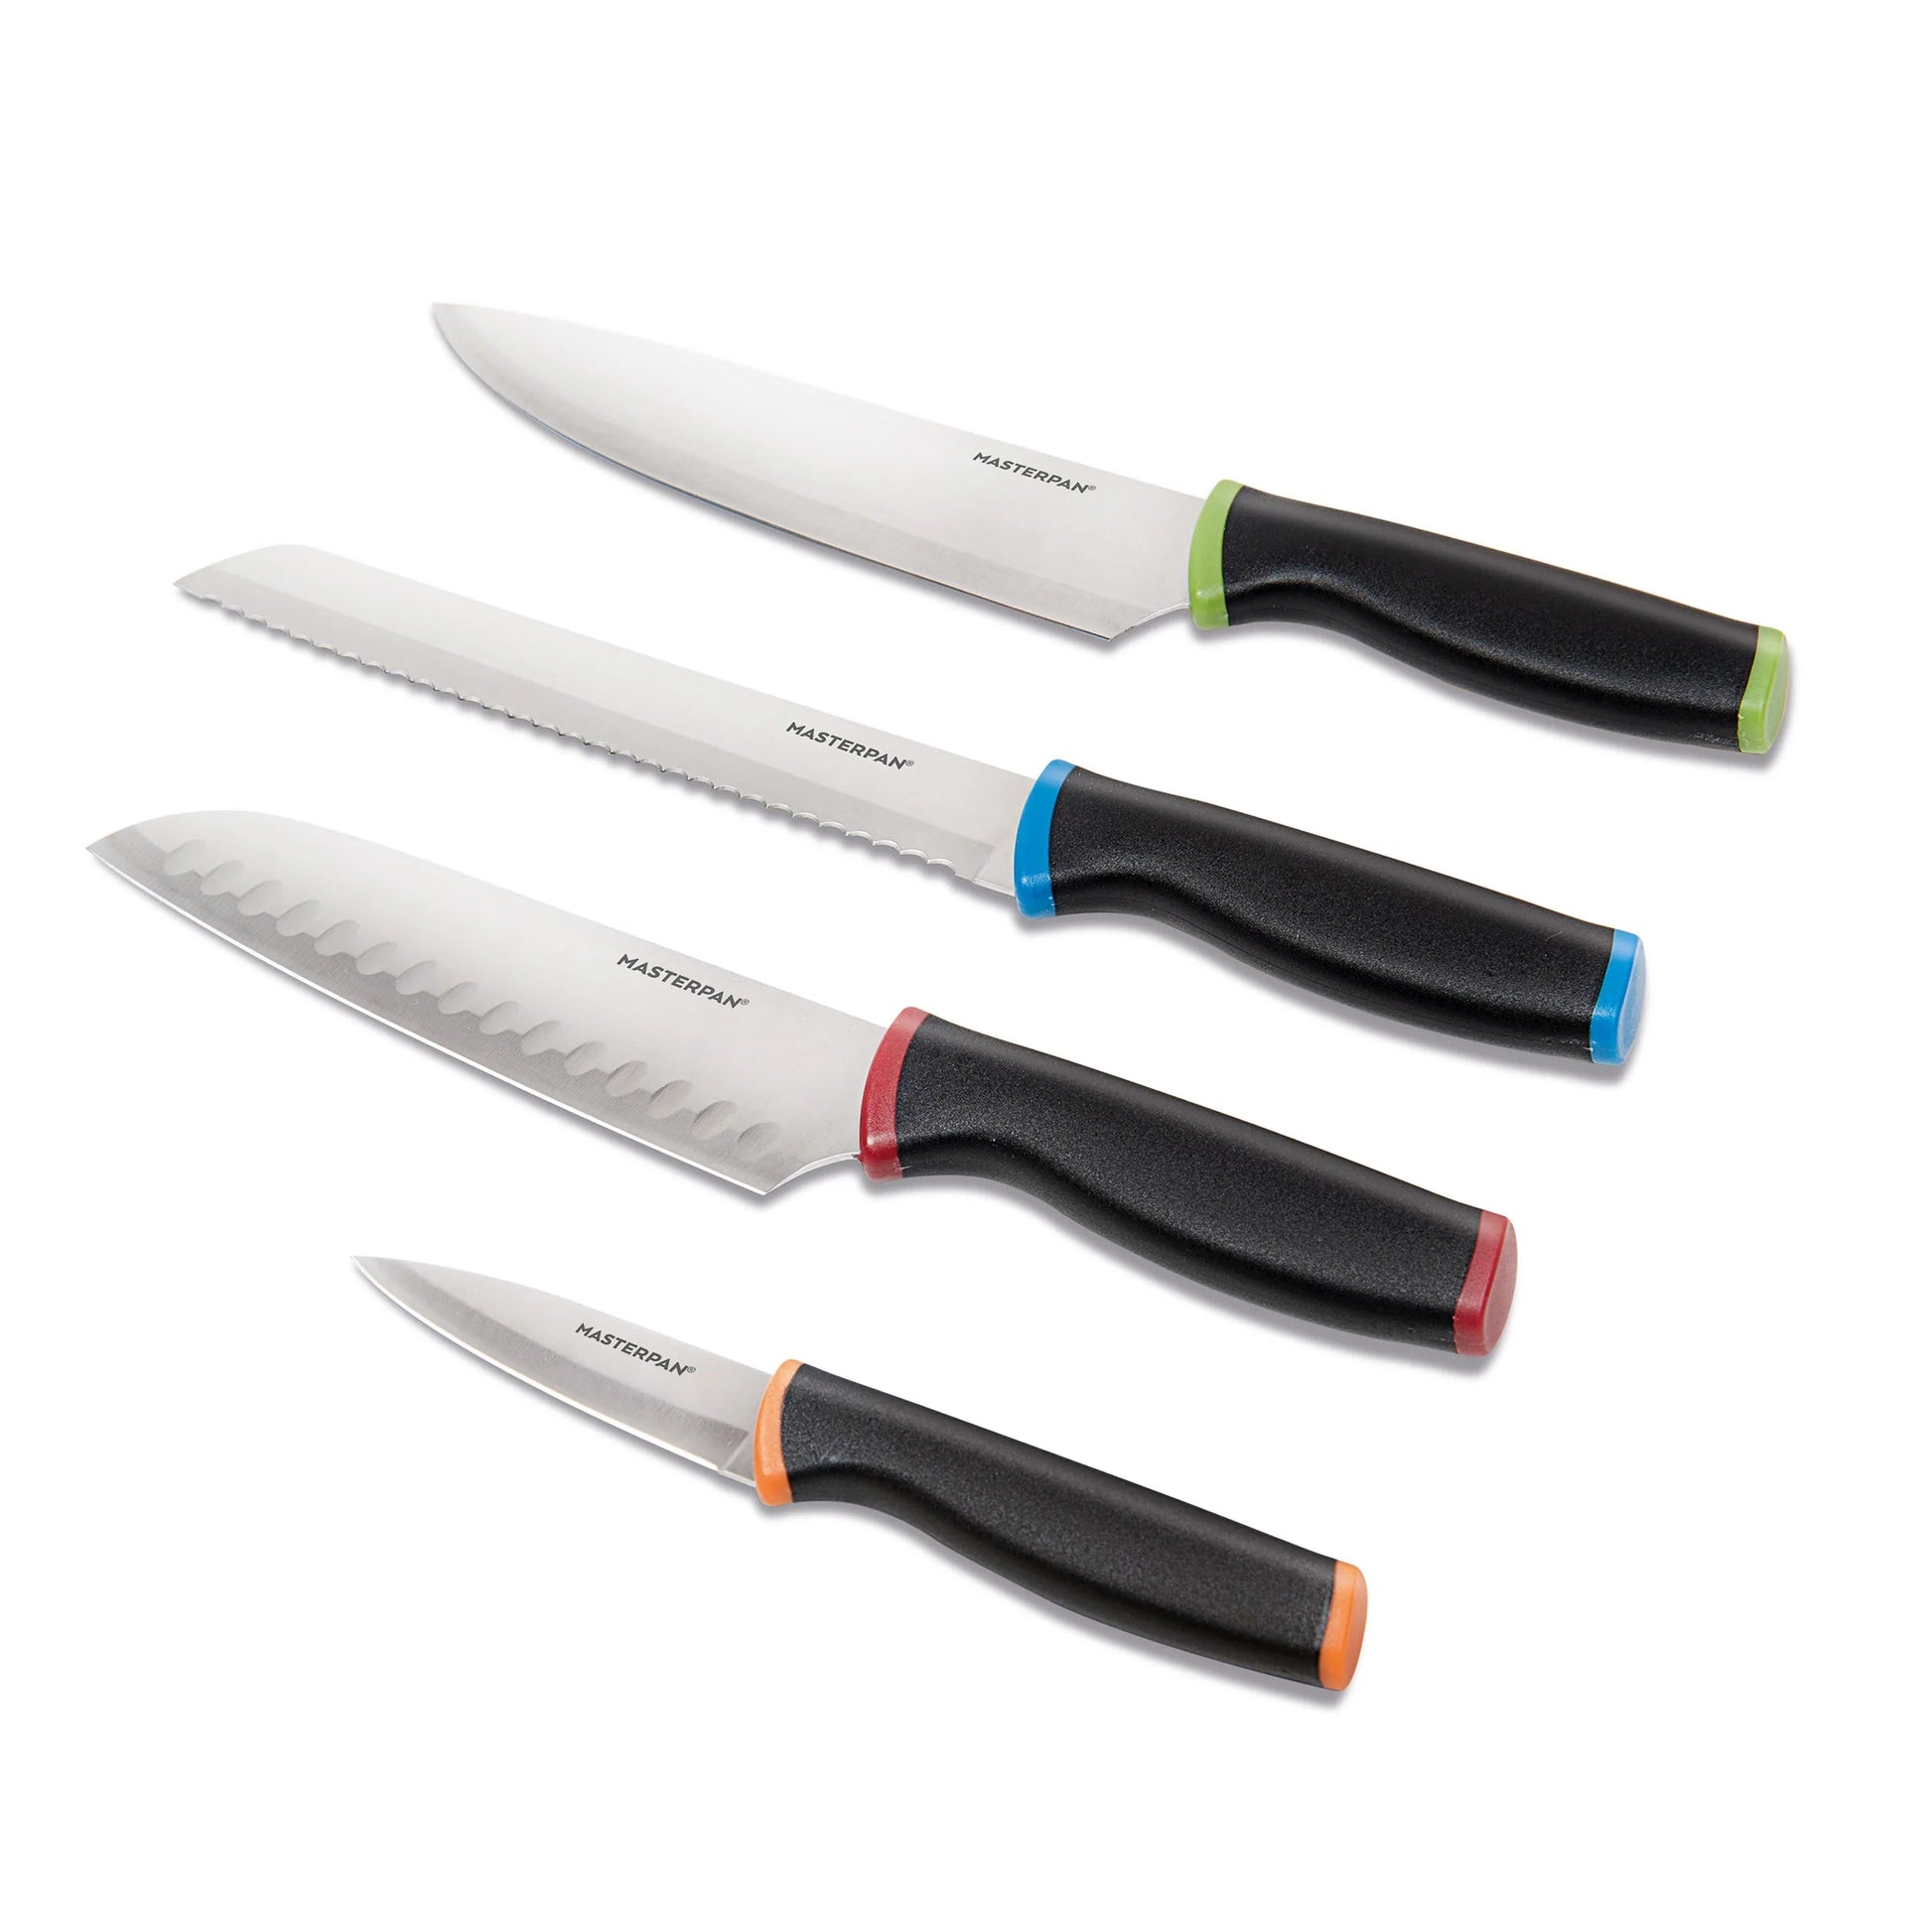 https://kitchenoasis.com/cdn/shop/files/MASTERPAN-Kitchen-Prep-8-pc-Knife-Set-With-Protective-Blade-Covers-Stainless-Steel-Blade-and-Non-Slip-Handle.webp?v=1685840192&width=1946